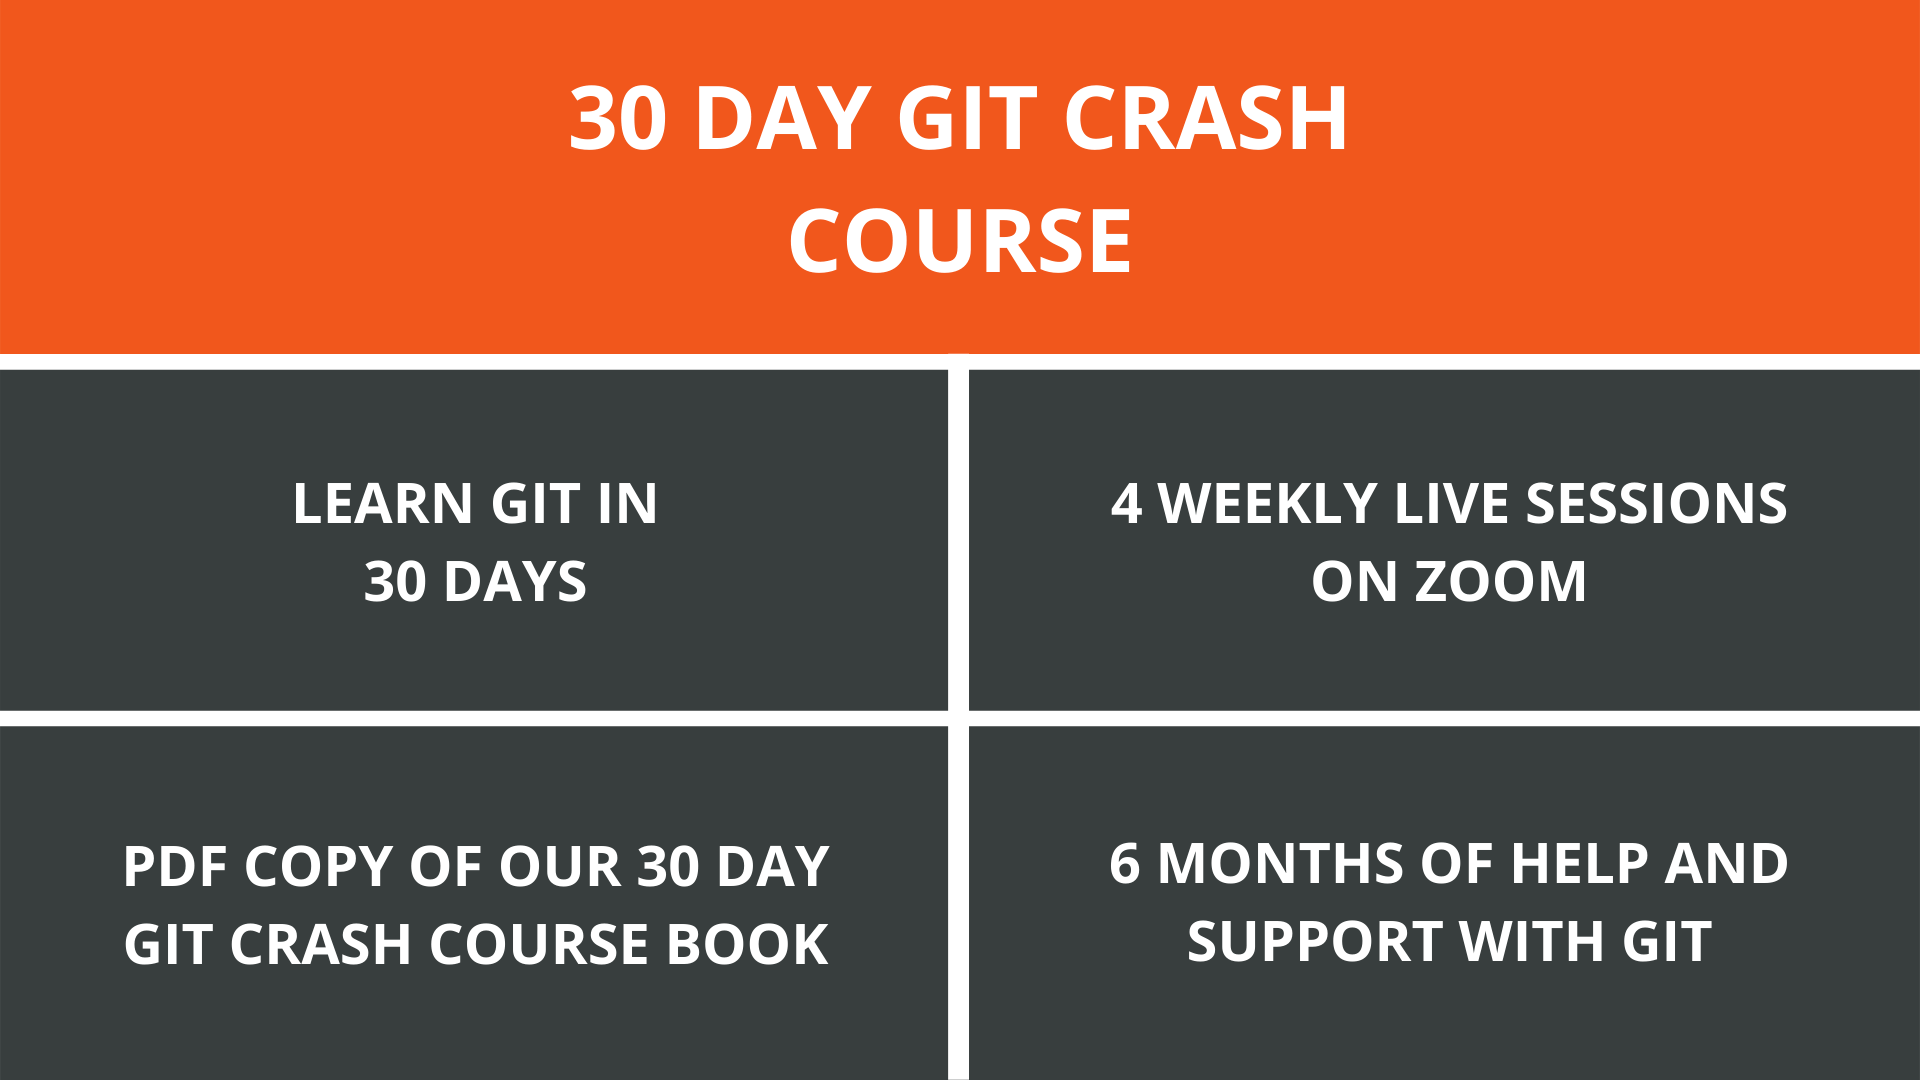 Image of the 30 day git crash course